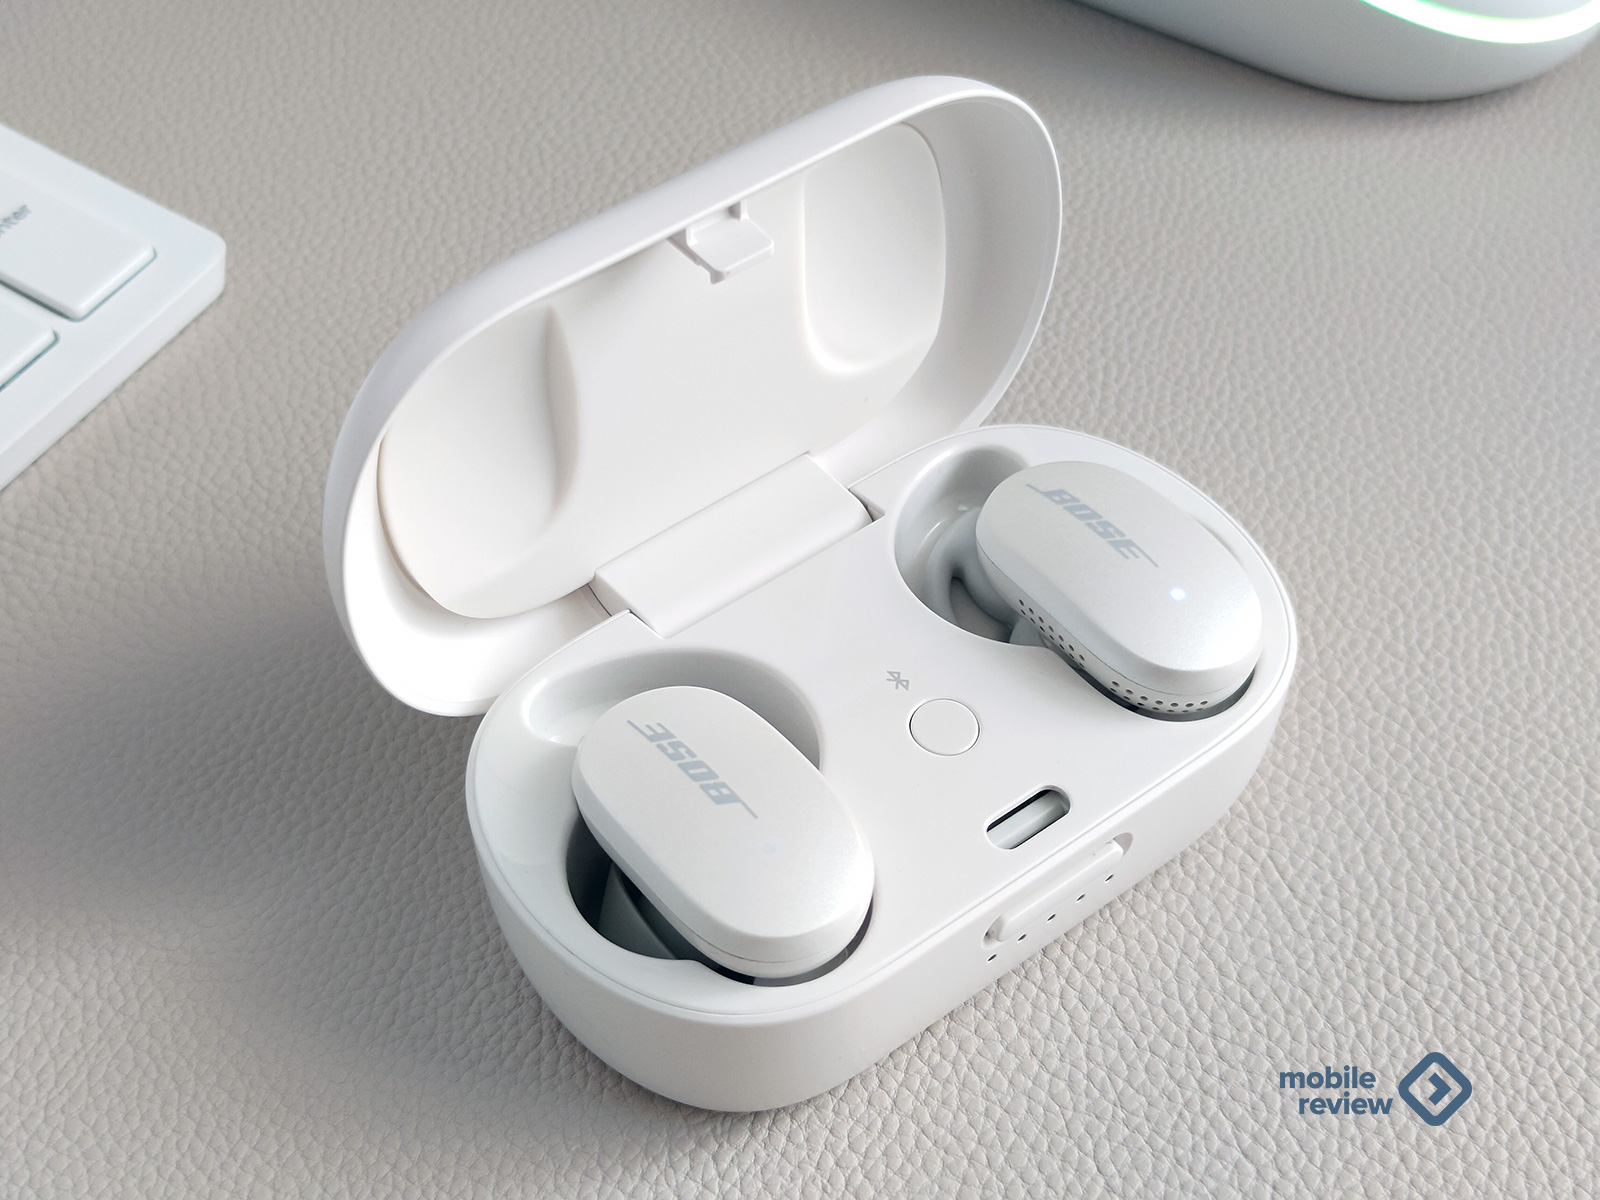 Наушники bose earbuds. Bose QUIETCOMFORT Earbuds 2. Bose QC Earbuds. Беспроводные наушники Bose QC Earbuds. Bose QUIETCOMFORT Earbuds 2 Soapstone.